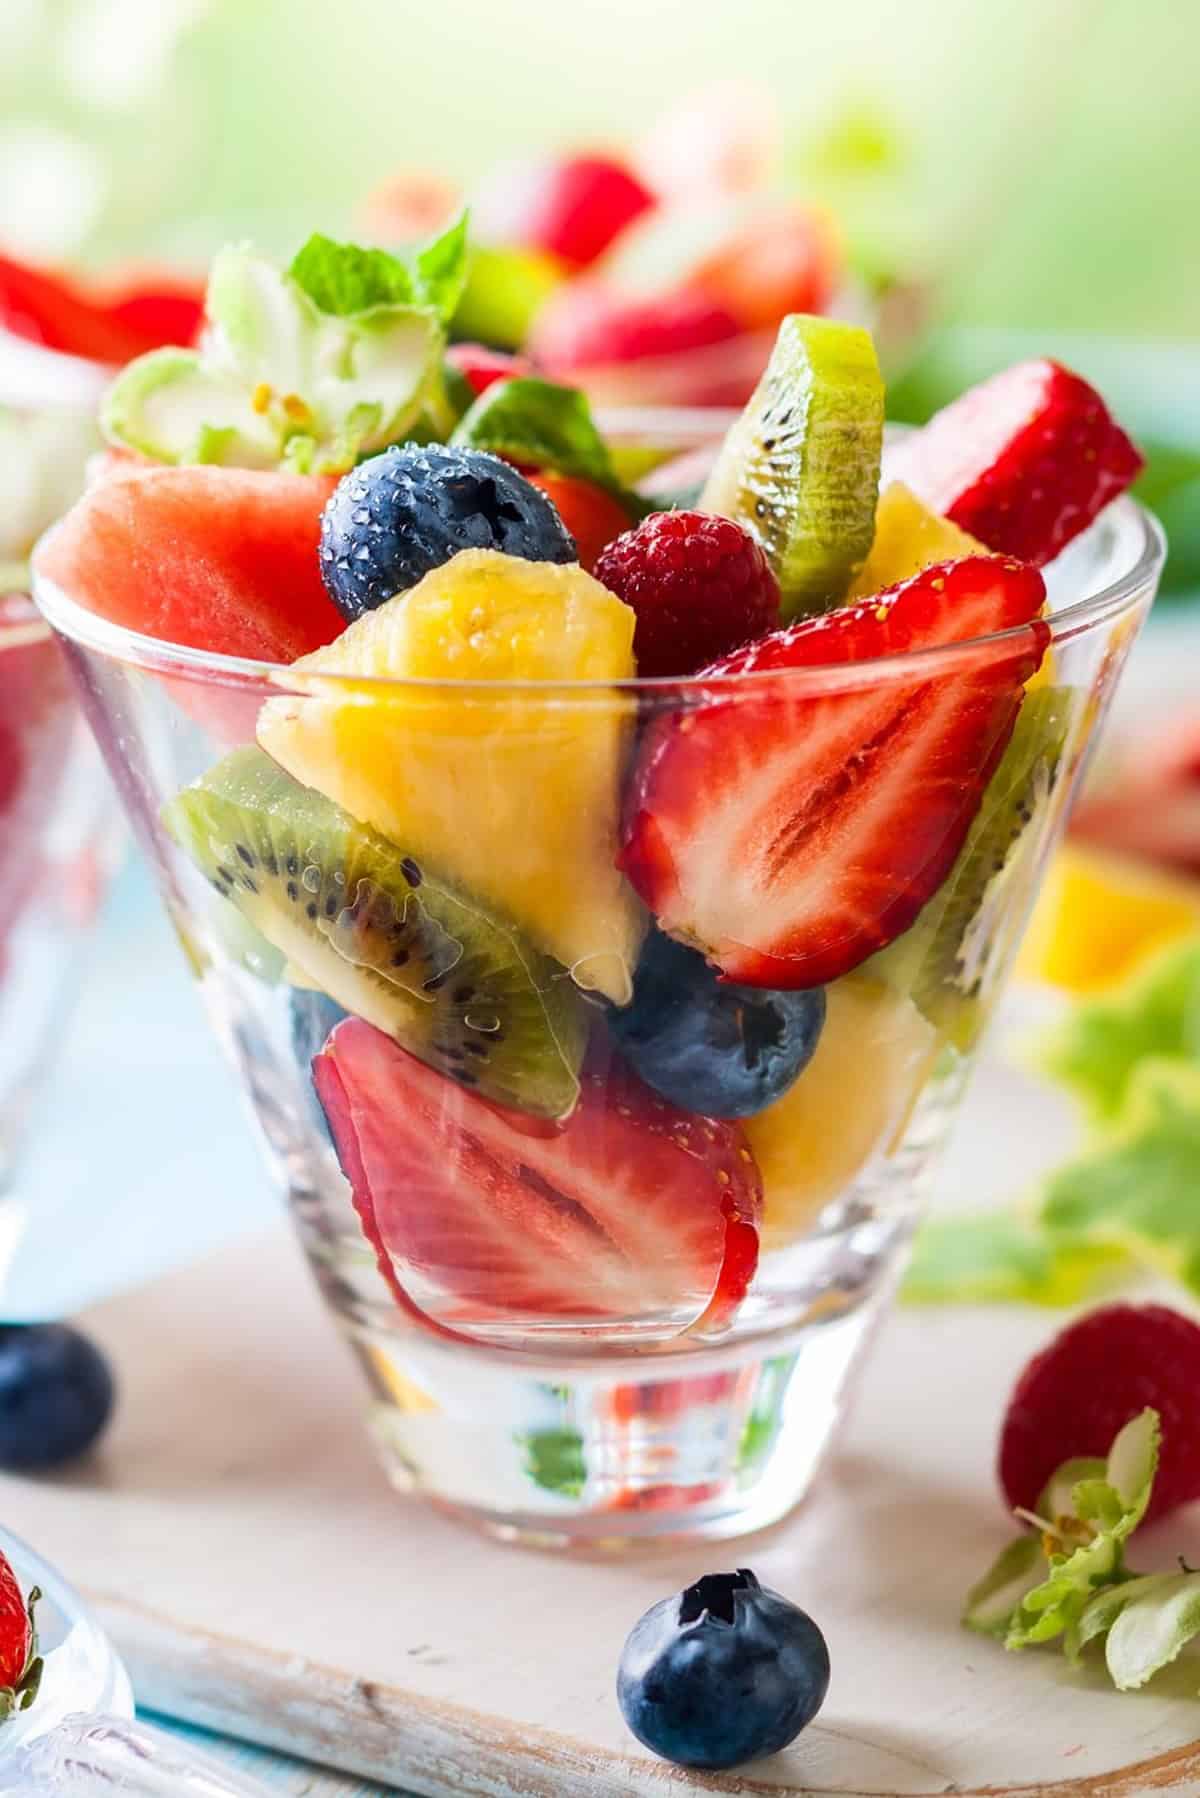 Tropical fruit salad in a glass cup with fresh fruits on a cutting board.